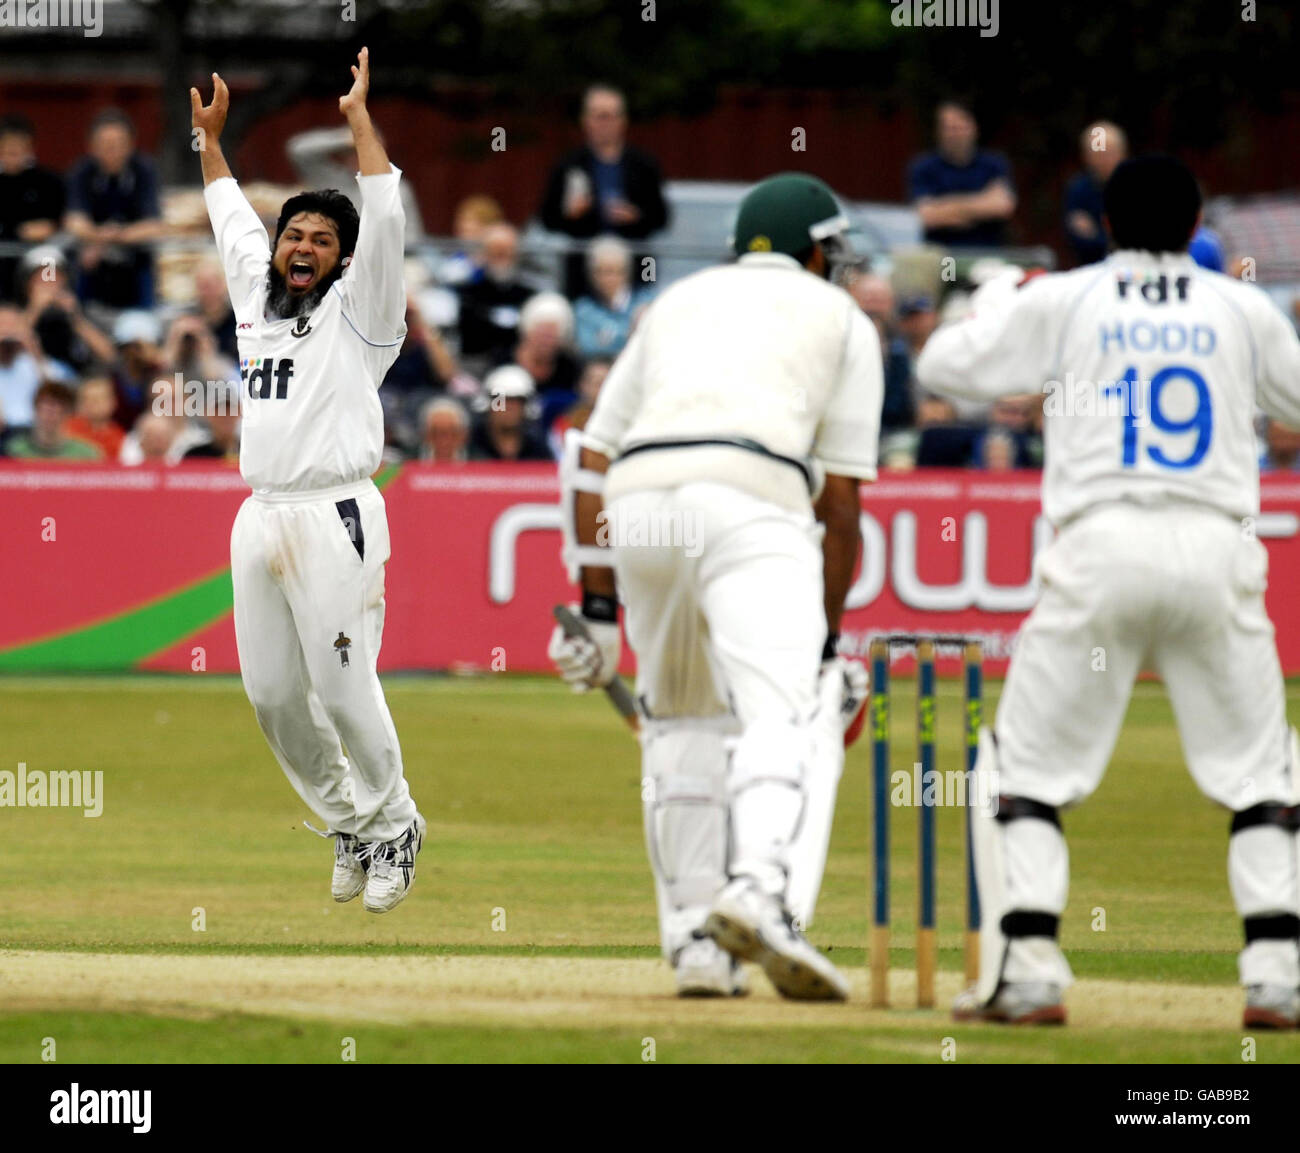 Sussex's Mushtaq Ahmed celebrates the wicket of Worcestershire' Richard Jones during the Liverpool Victoria County Championship Division One match at the County Cricket Ground, Hove. Stock Photo